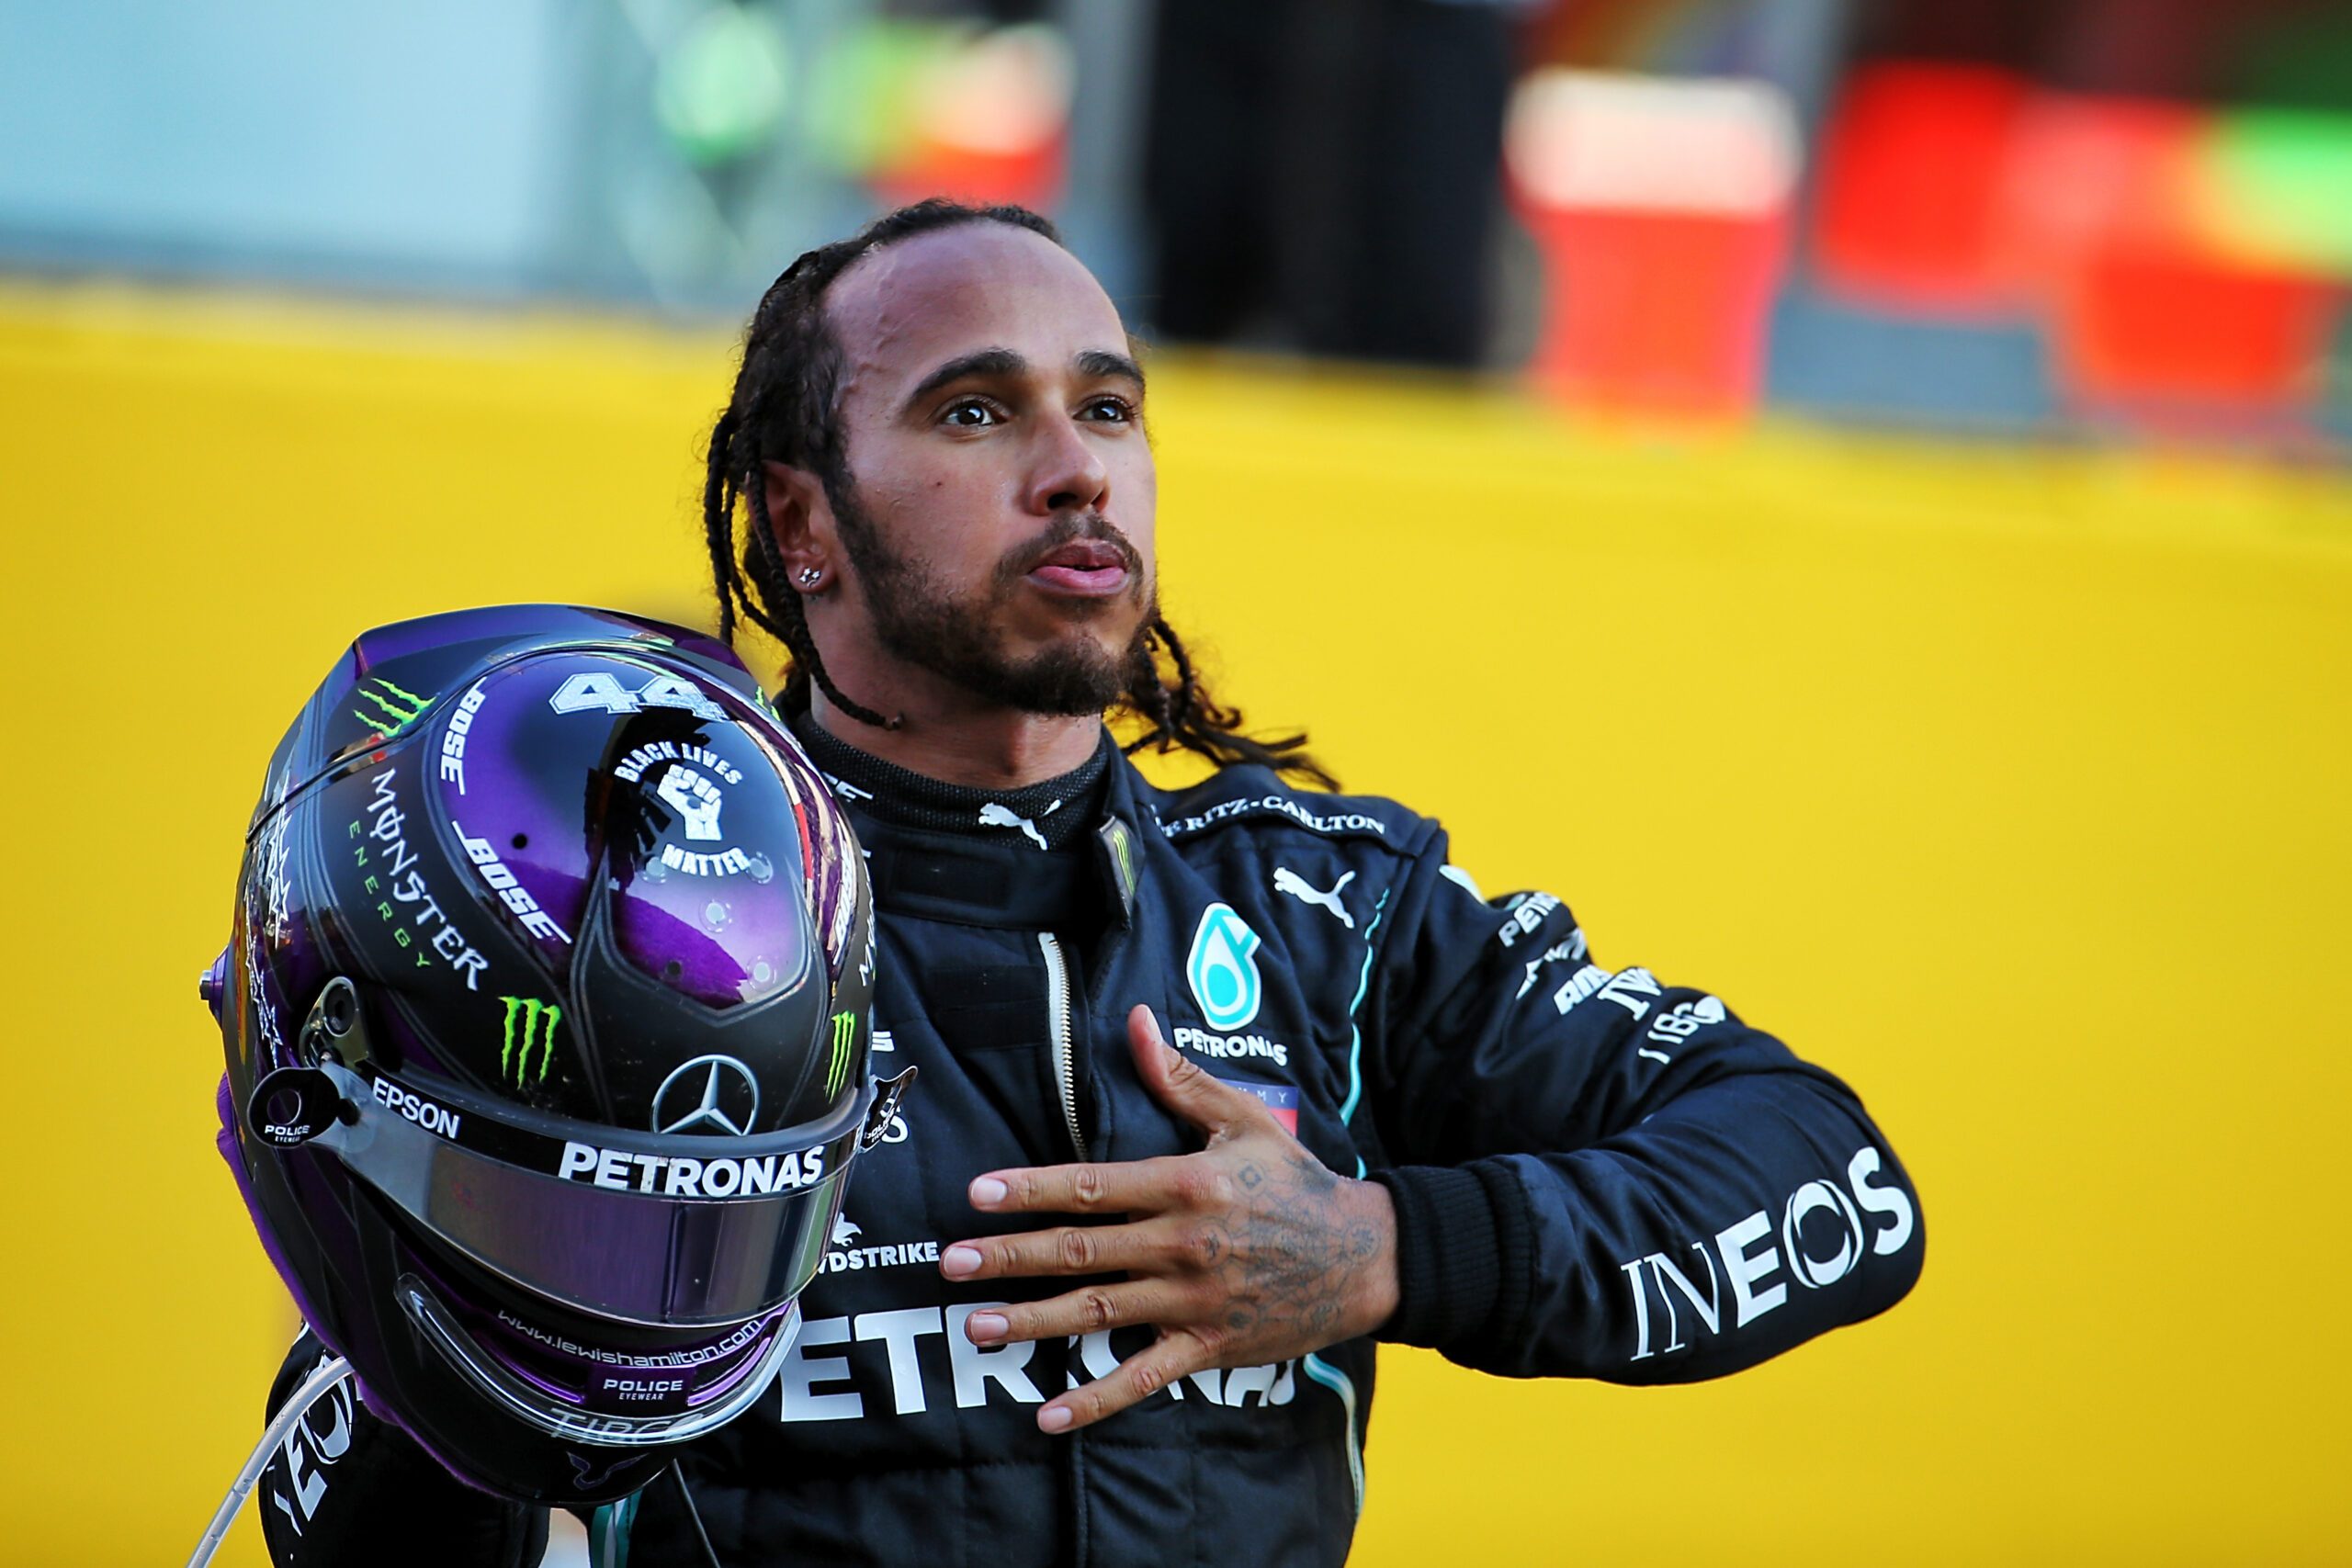 MUGELLO,ITALY,13.SEP.20 - MOTORSPORTS, FORMULA 1 - Grand Prix of Tuscany, Mugello circuit. Image shows Lewis Hamilton (GBR/ Mercedes). Photo: GEPA pictures/ XPB Images/ Batchelor - ATTENTION - COPYRIGHT FOR AUSTRIAN CLIENTS ONLY